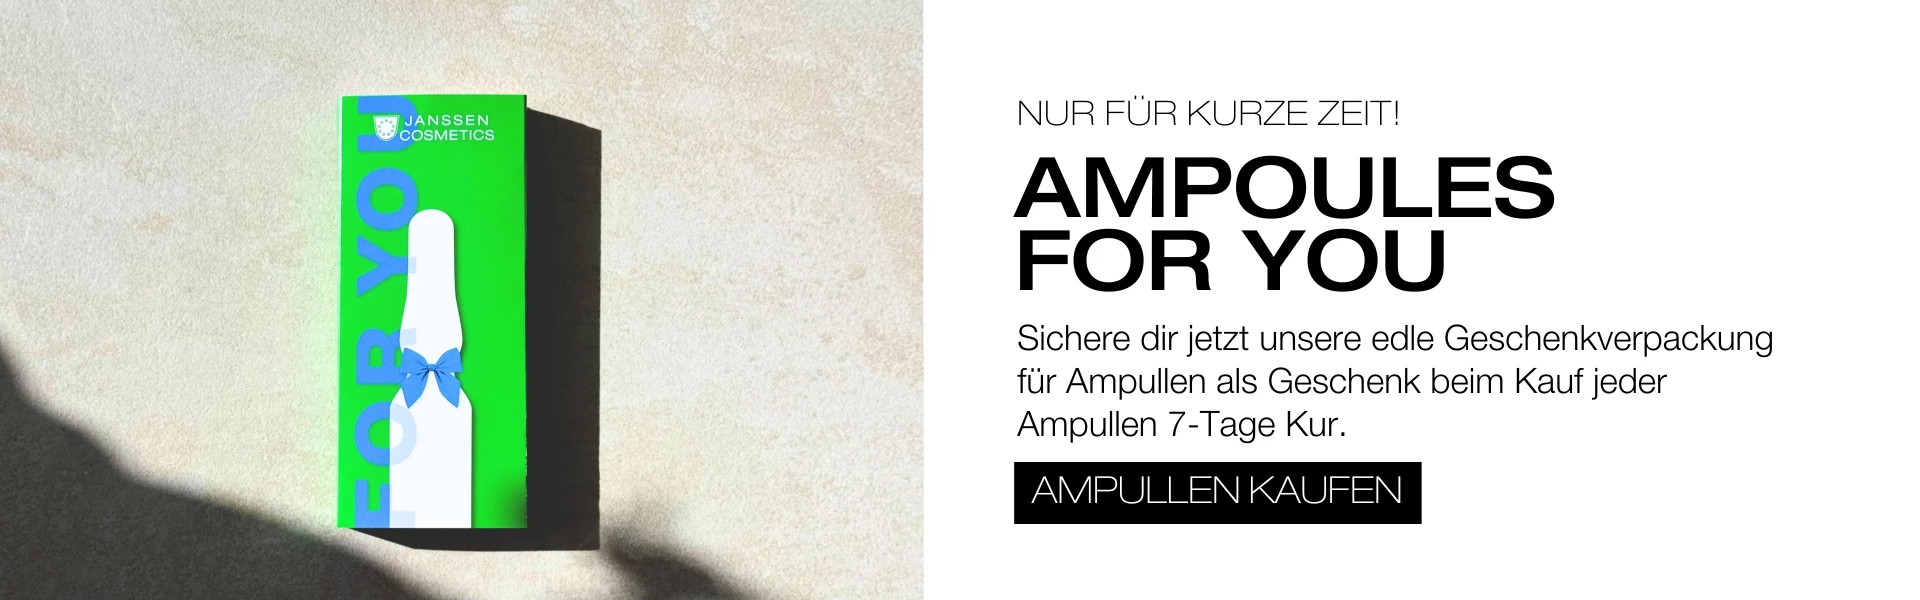 schuber / limited ampoules